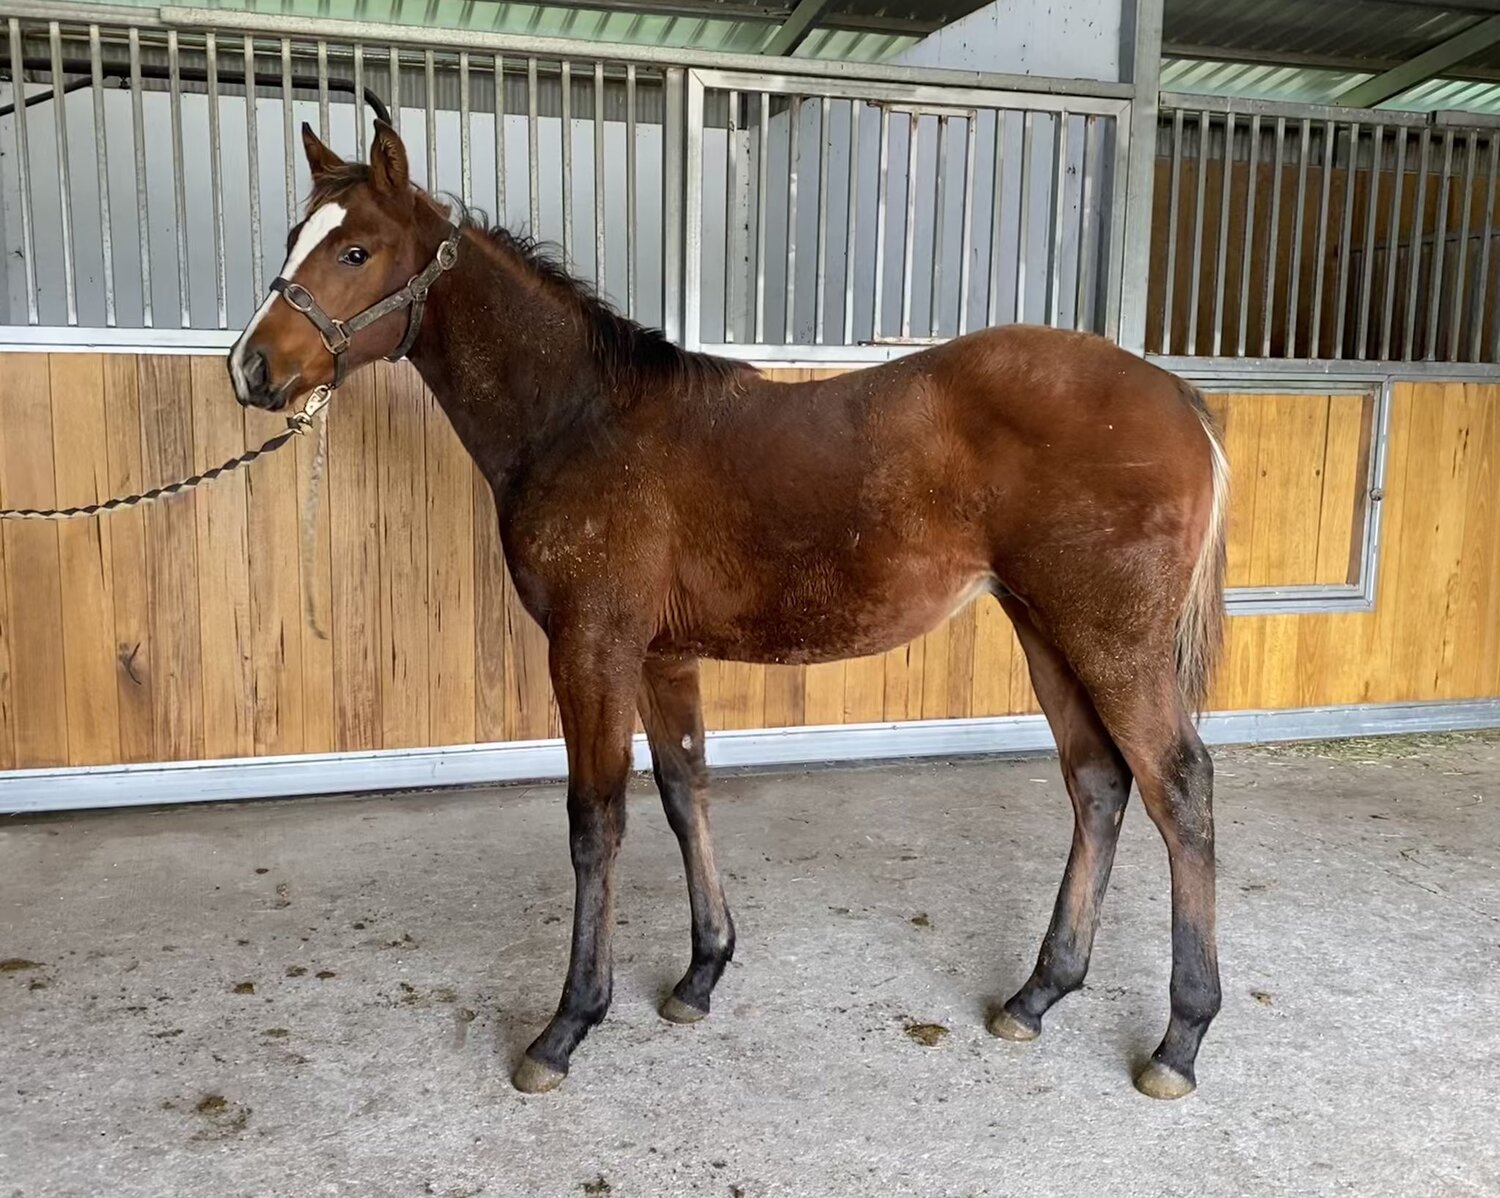 The Dundeel x Personalised colt.